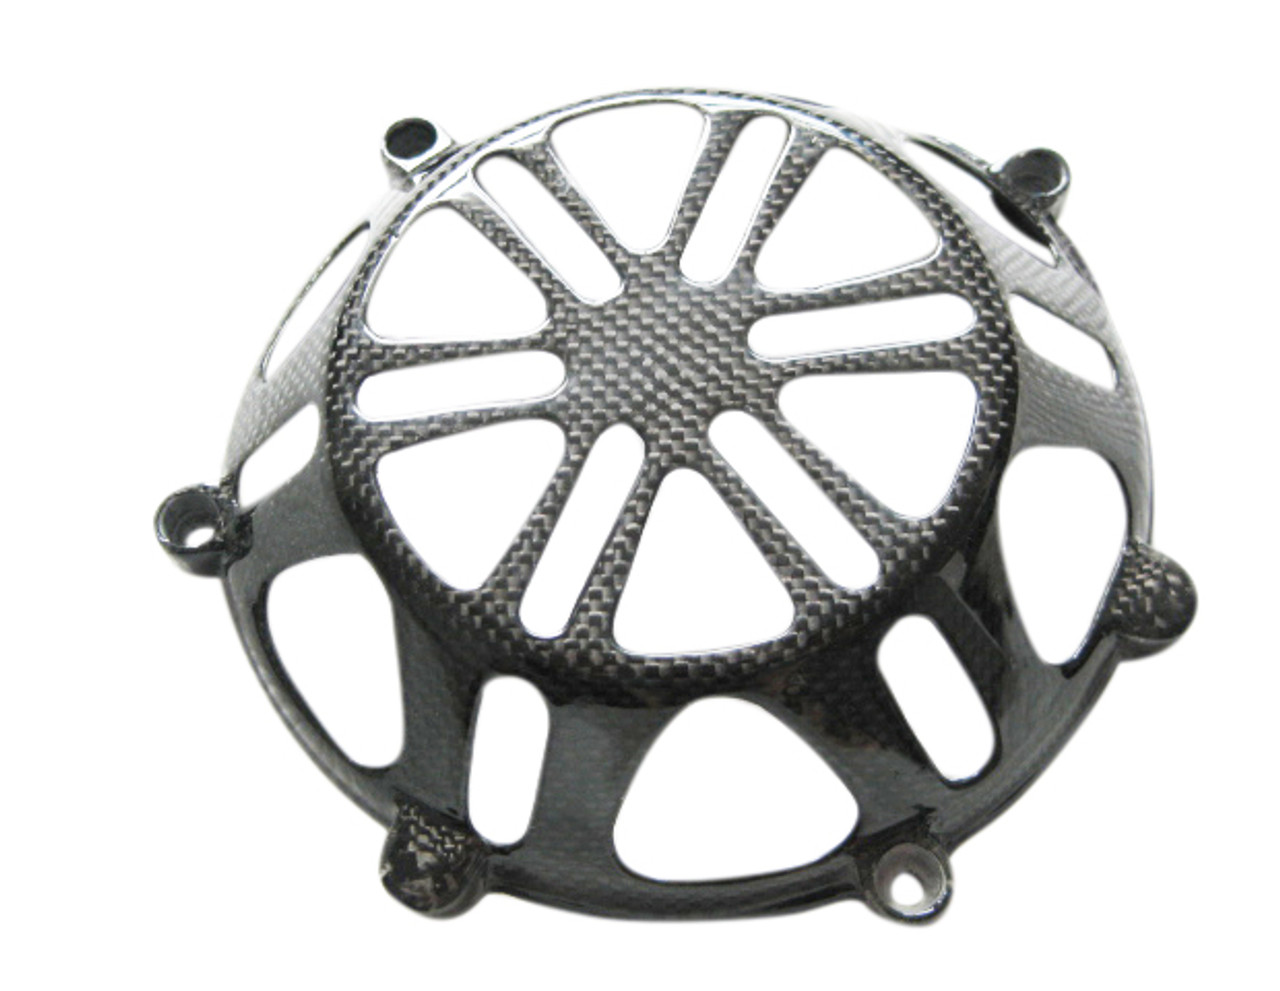 Glossy Plain Weave Carbon Fiber  Clutch Cover for all Ducati with Dry Clutches (style 4)